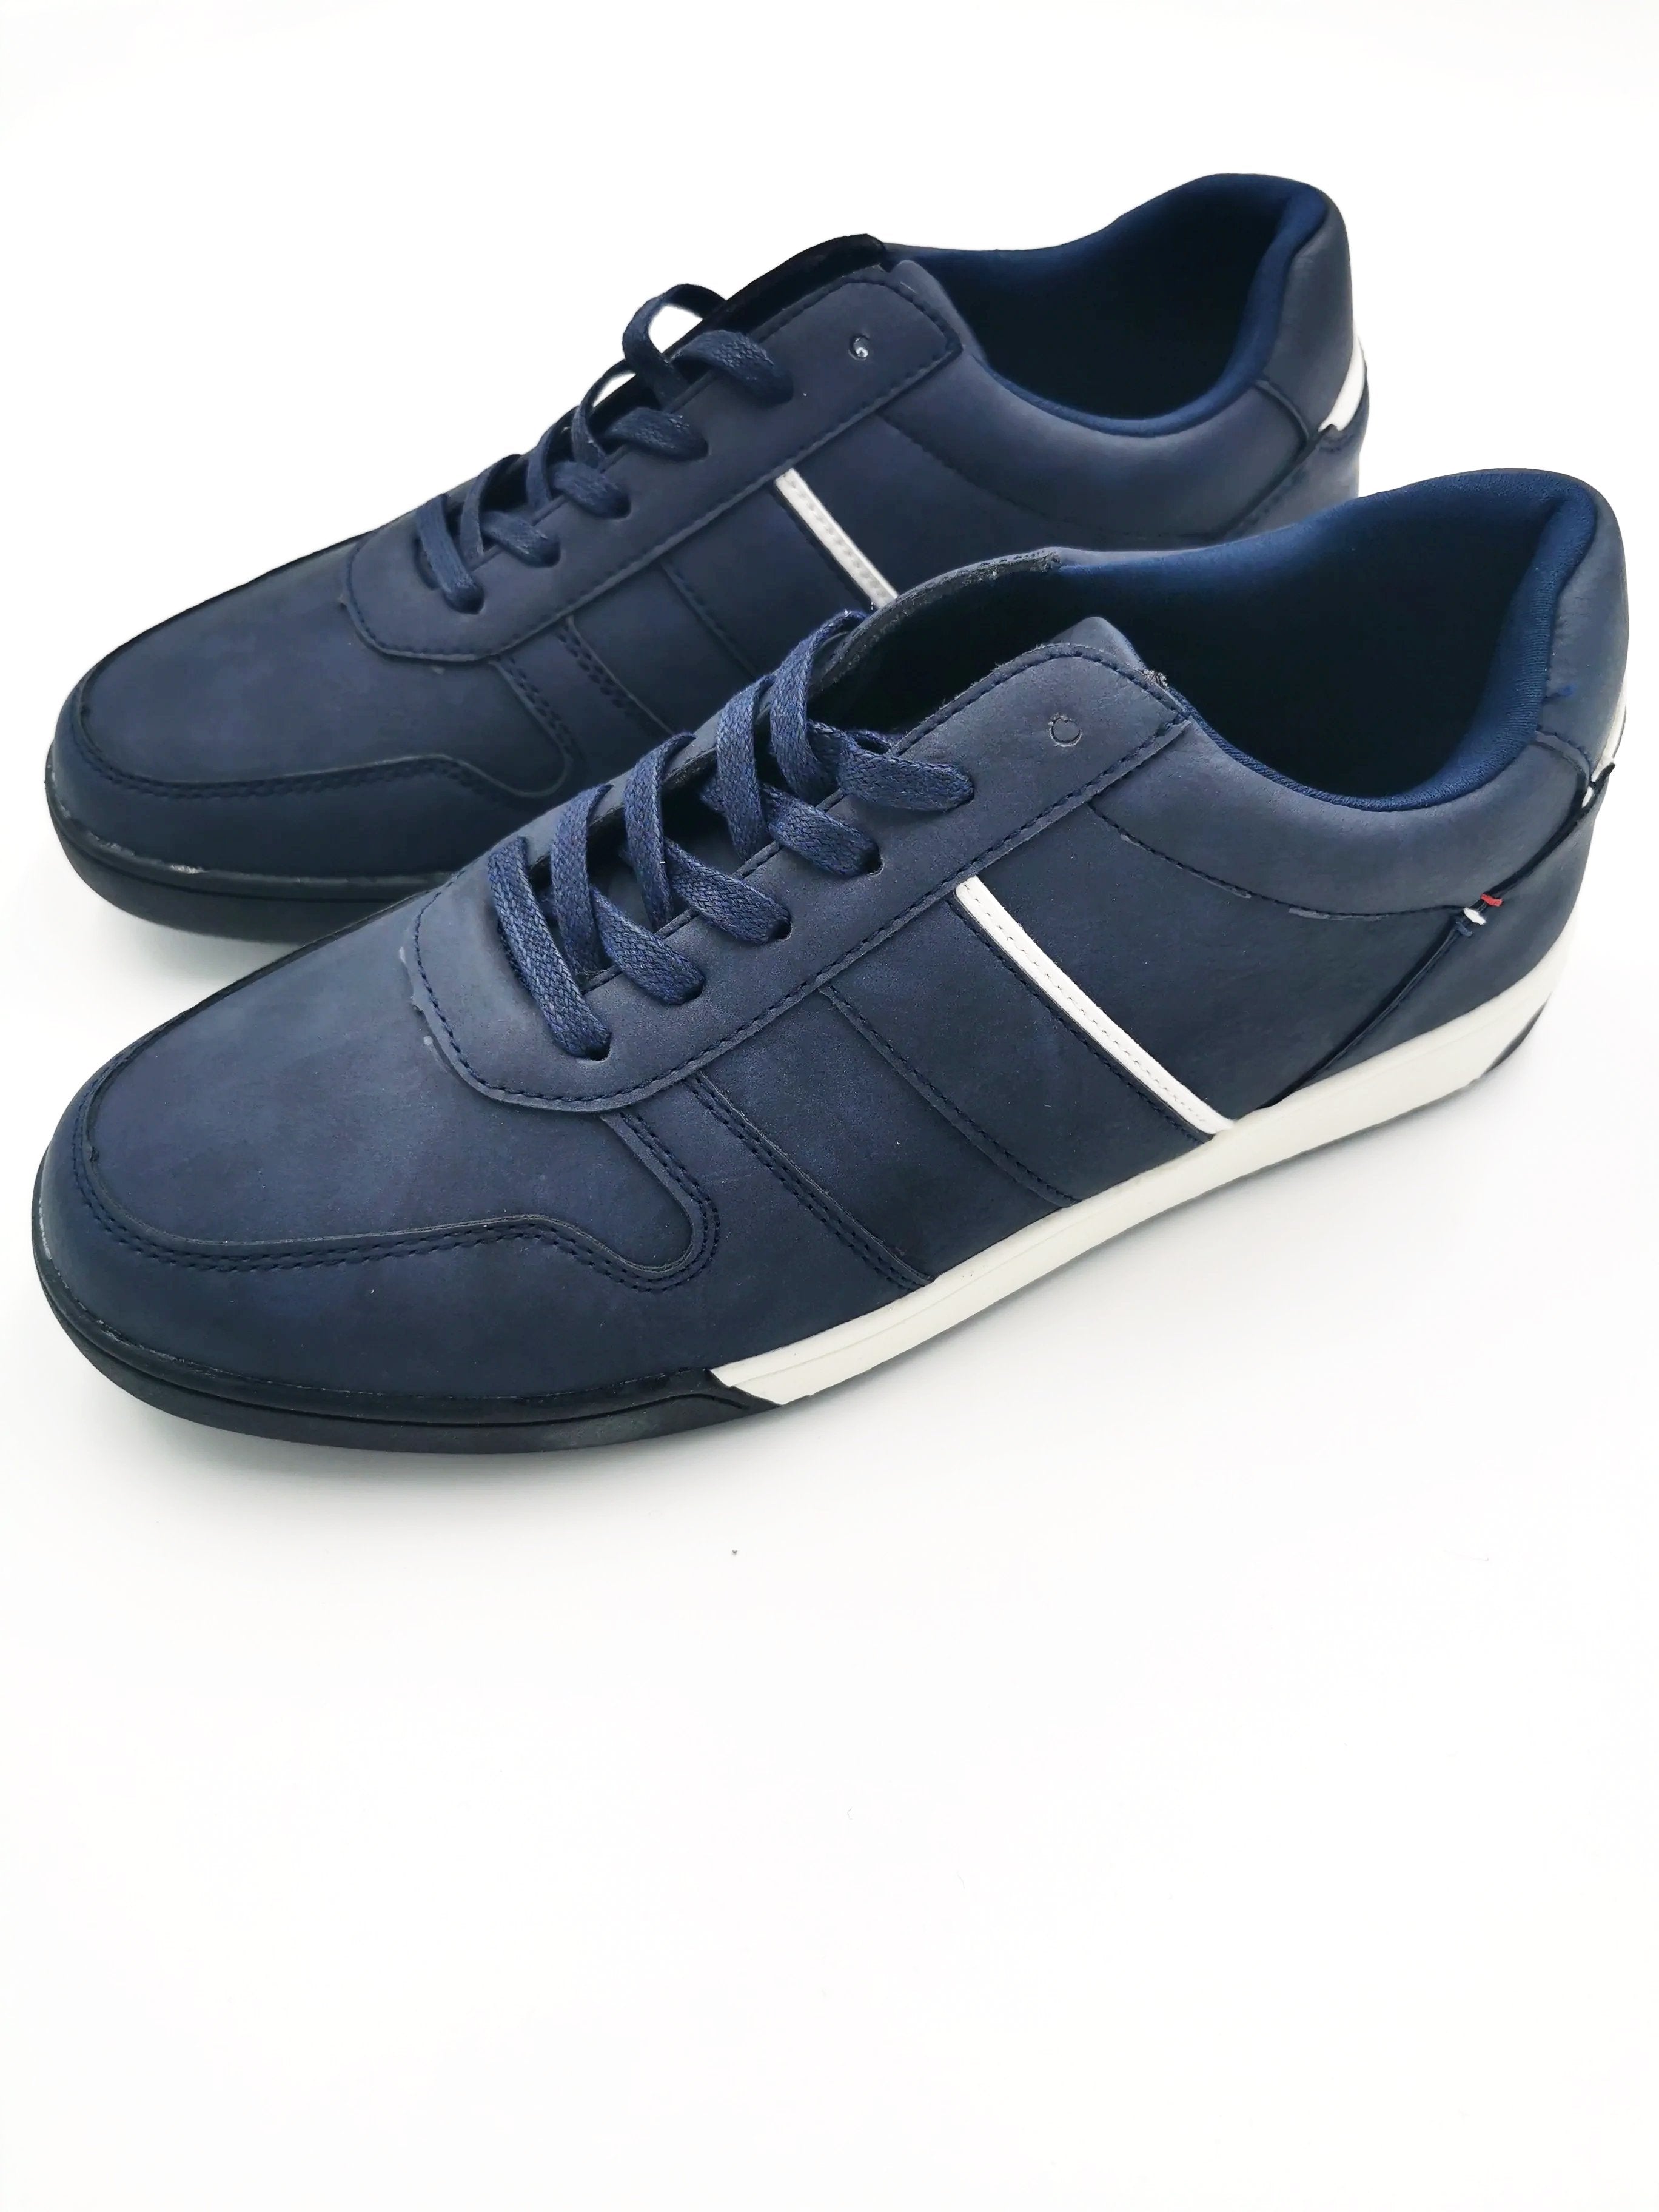 Morgan & Co. Faux Leather Navy Lace up Trainer/Runner